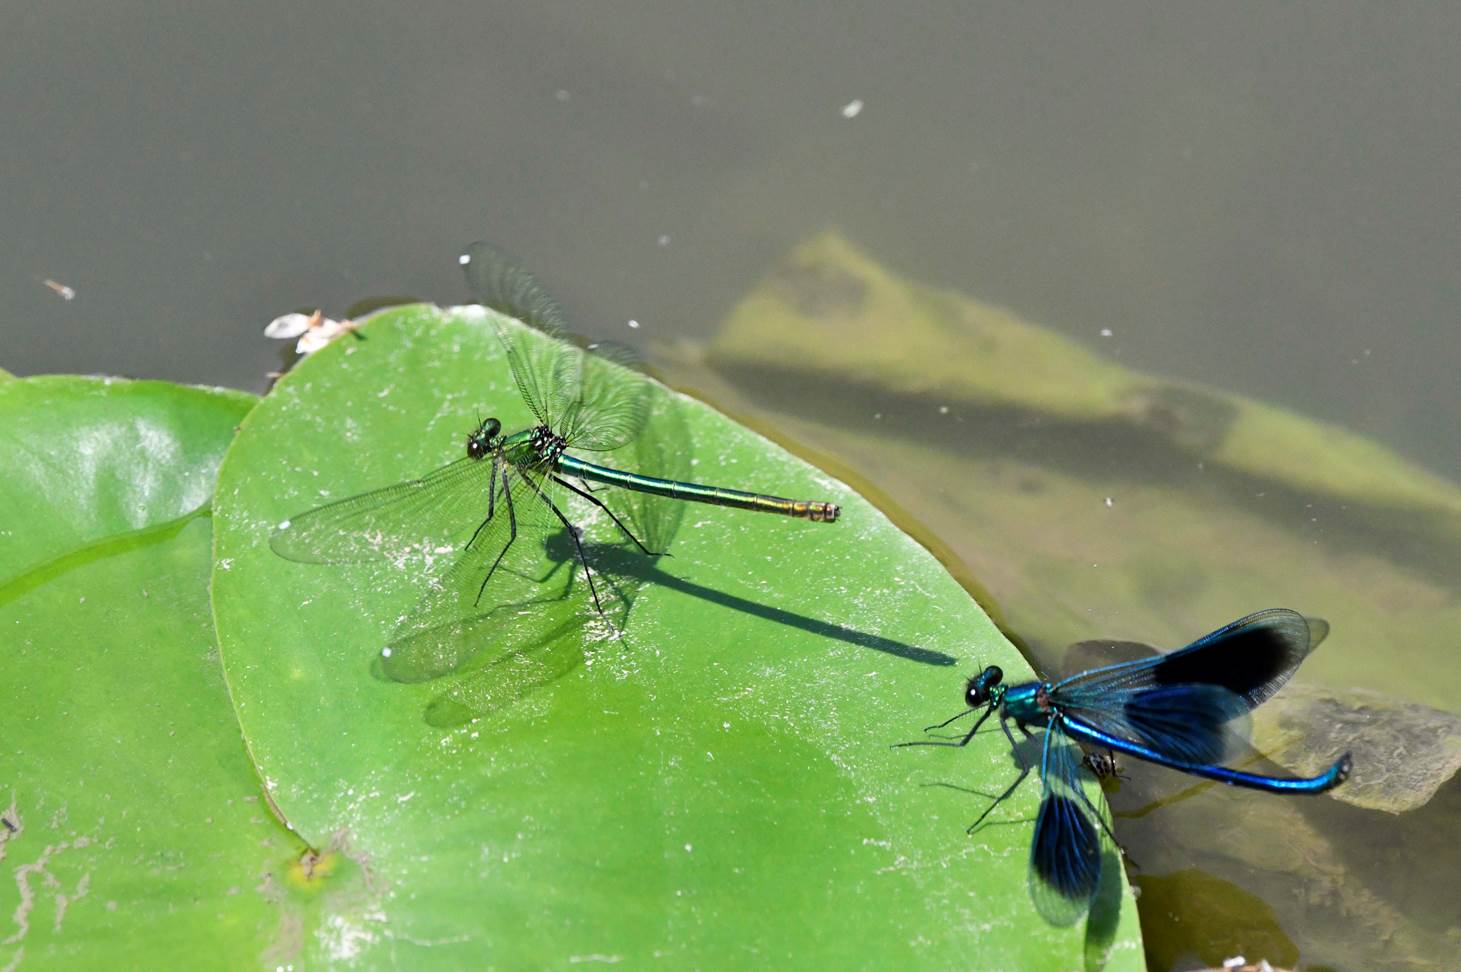 A pair of dragonflies on a leaf

Description automatically generated